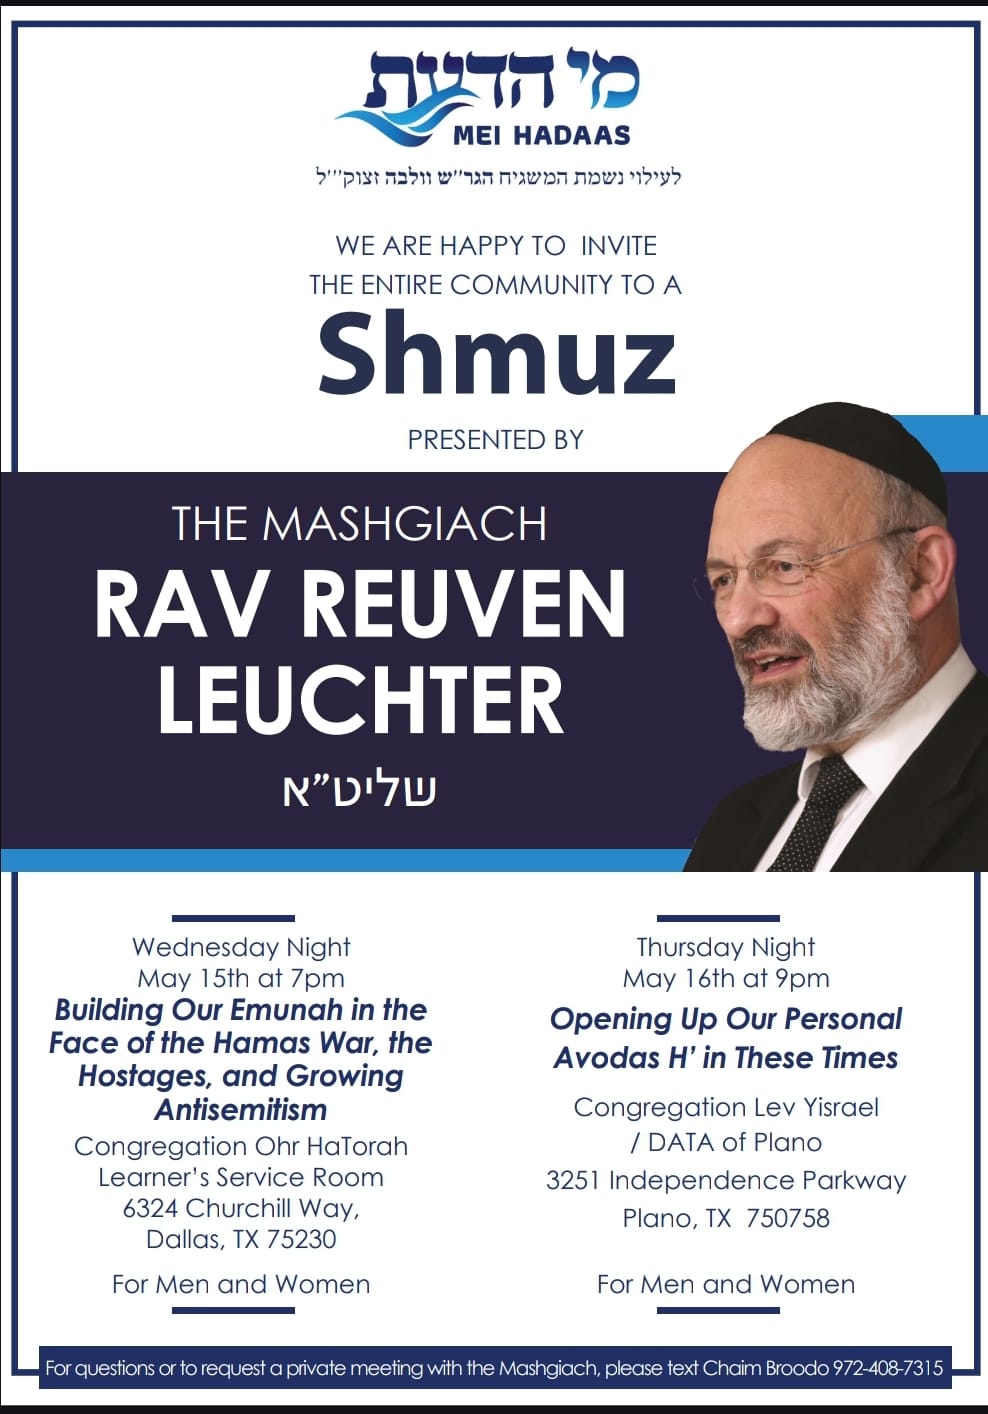 The Mashgiach, Rav Reuven Leuchter is in Dallas for two lectures.